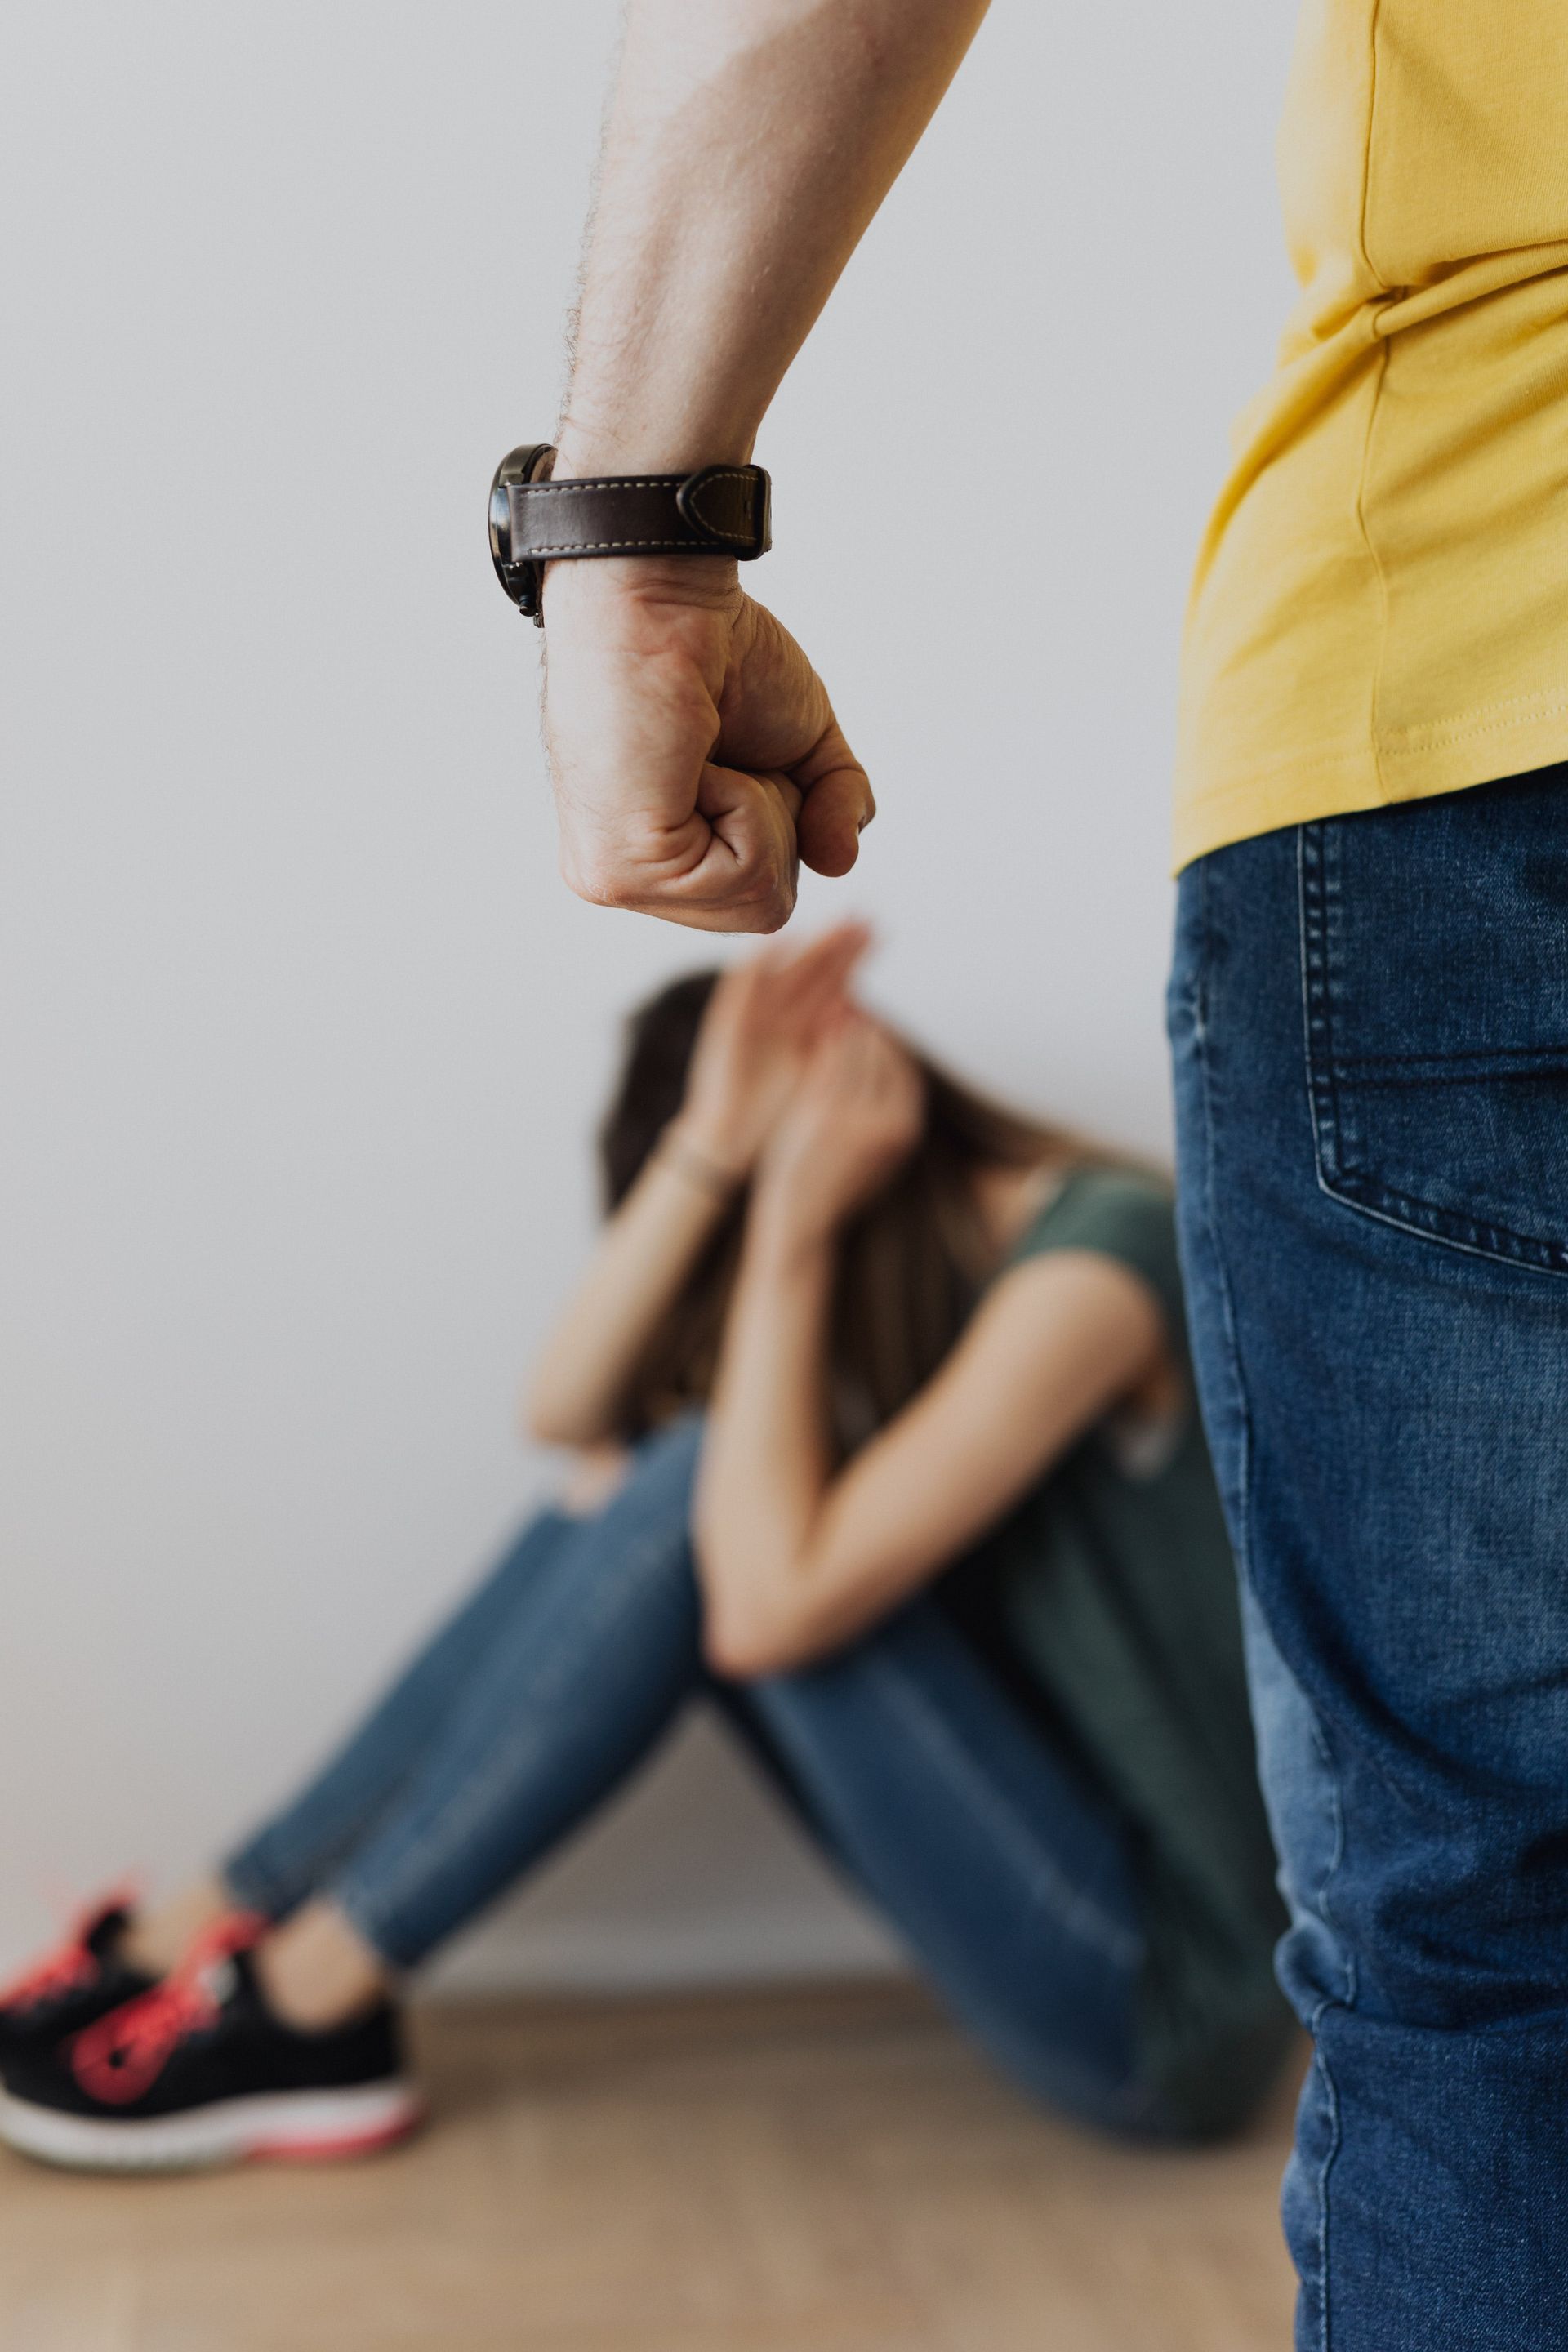 An image depicting a tense situation where a person in a yellow shirt and jeans has their clenched fist raised in a threatening gesture towards a woman sitting on the floor with her hands covering her face, appearing distressed. The focus is on the raised fist, conveying a powerful message about the intimidation and fear associated with domestic abuse.